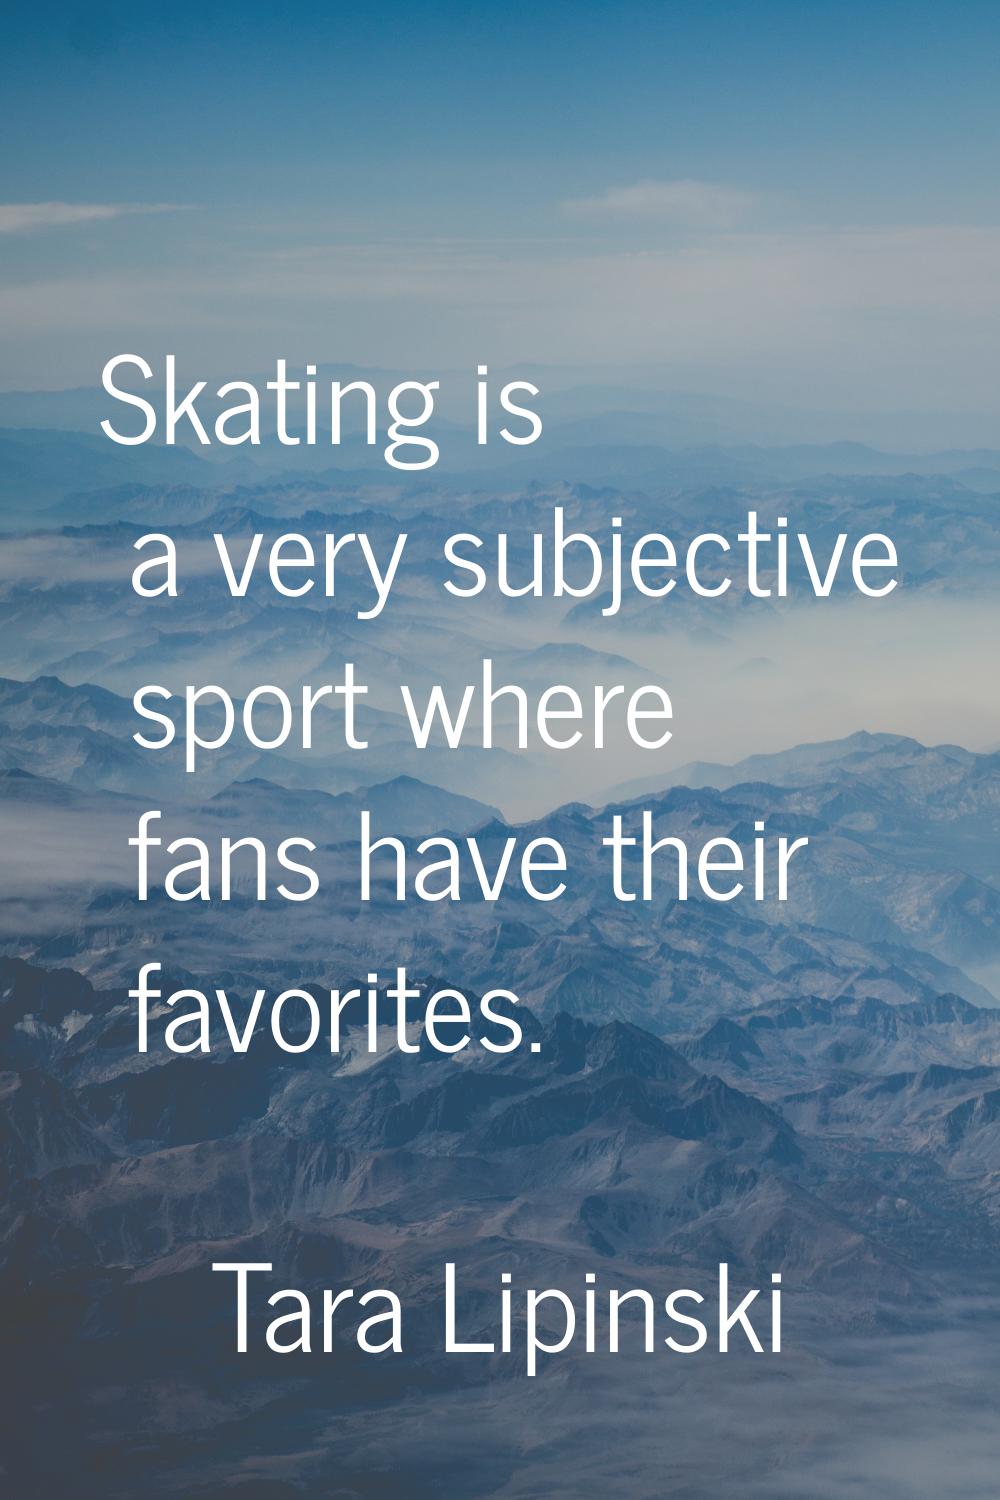 Skating is a very subjective sport where fans have their favorites.